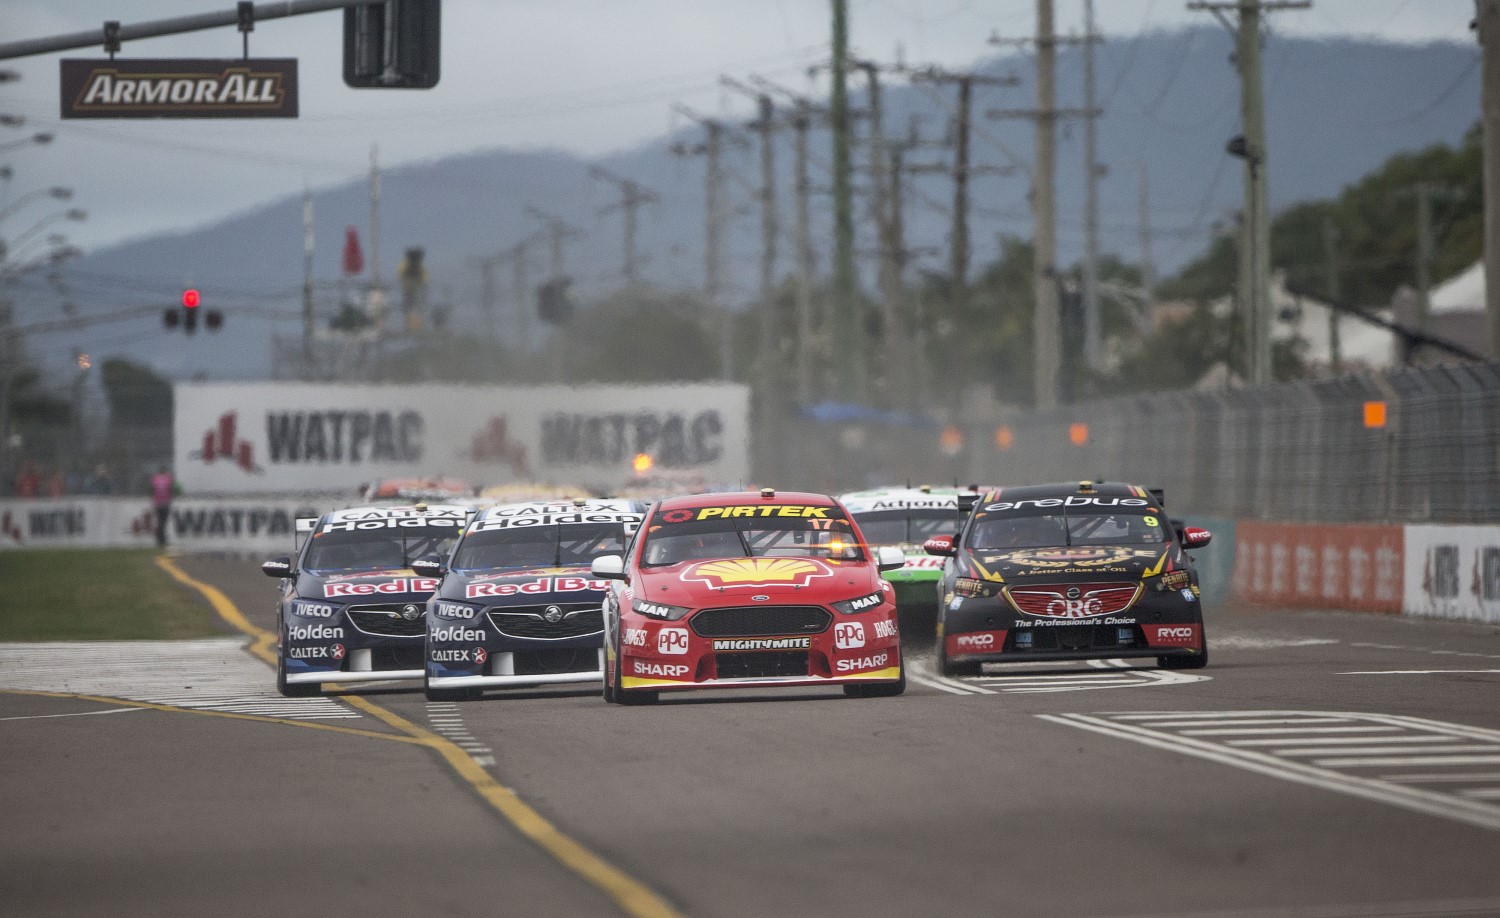 McLaughlin leads at the start but he could not hold off Whincup